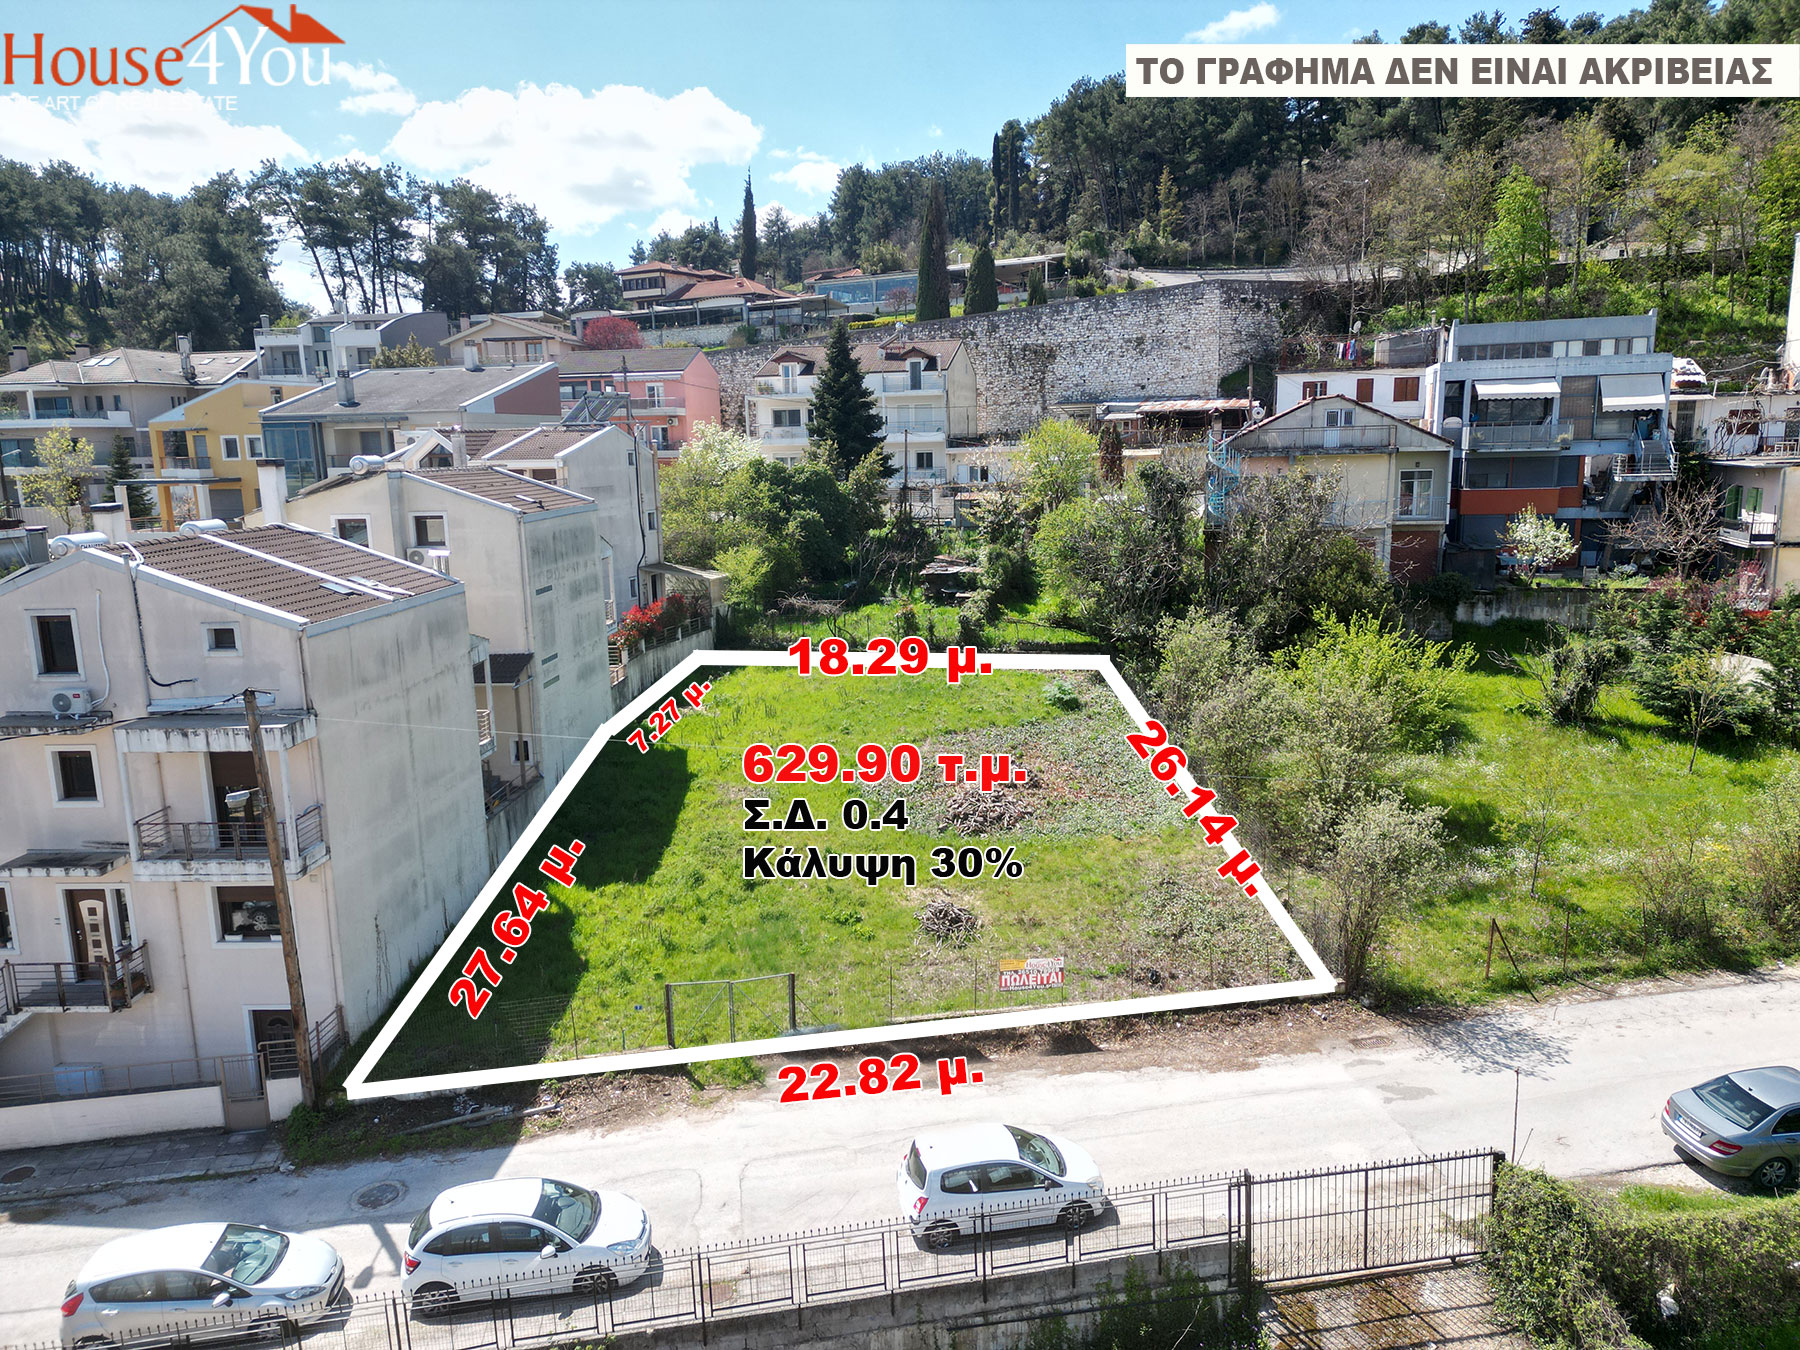 Privileged plot of 629 sq.m. for sale. with S.D. 0.4 in the area of Frontzos in Ioannina